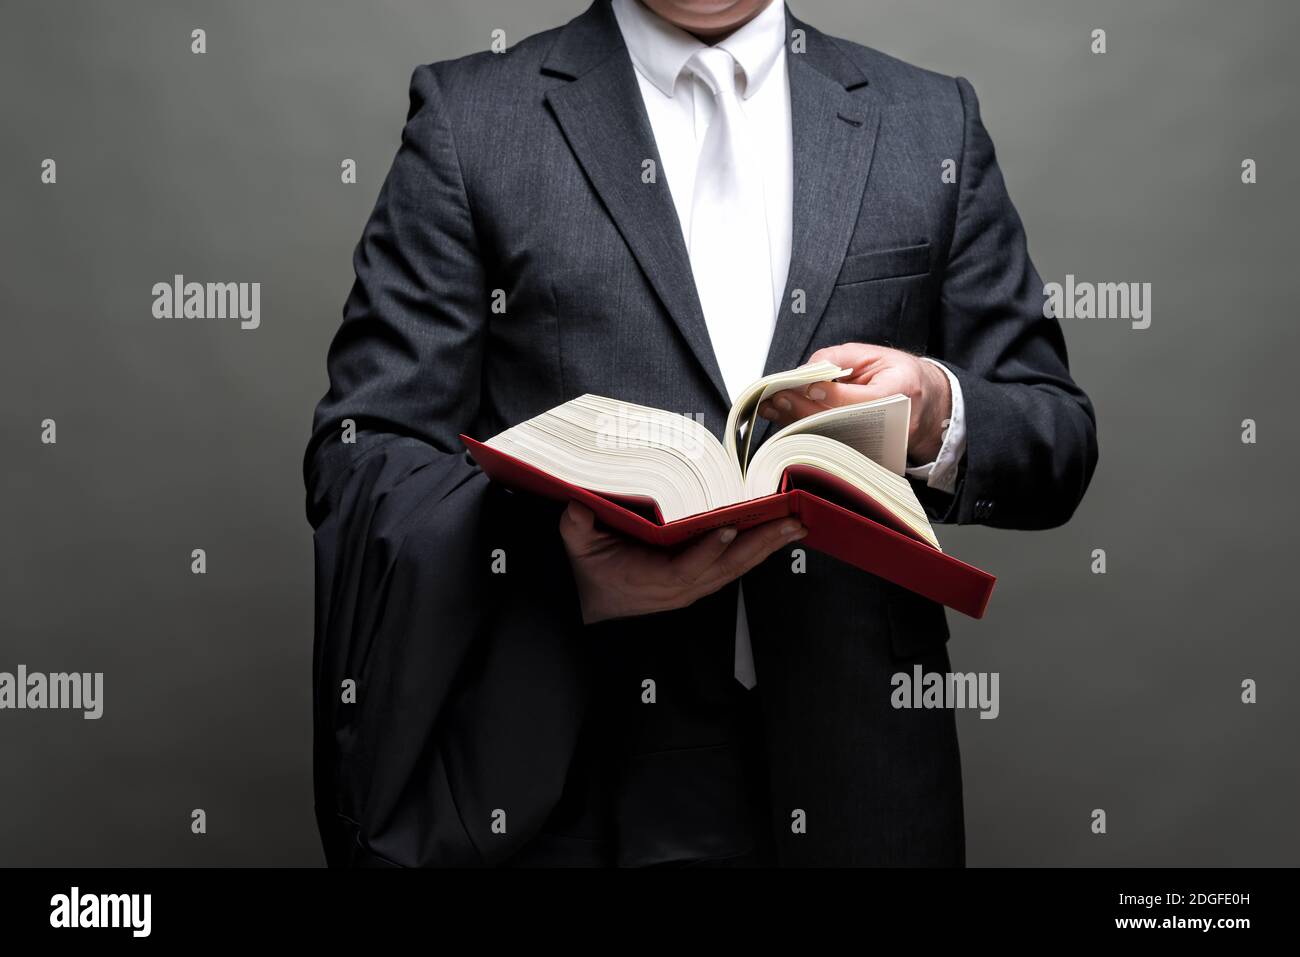 German lawyer with a robe and a book Stock Photo